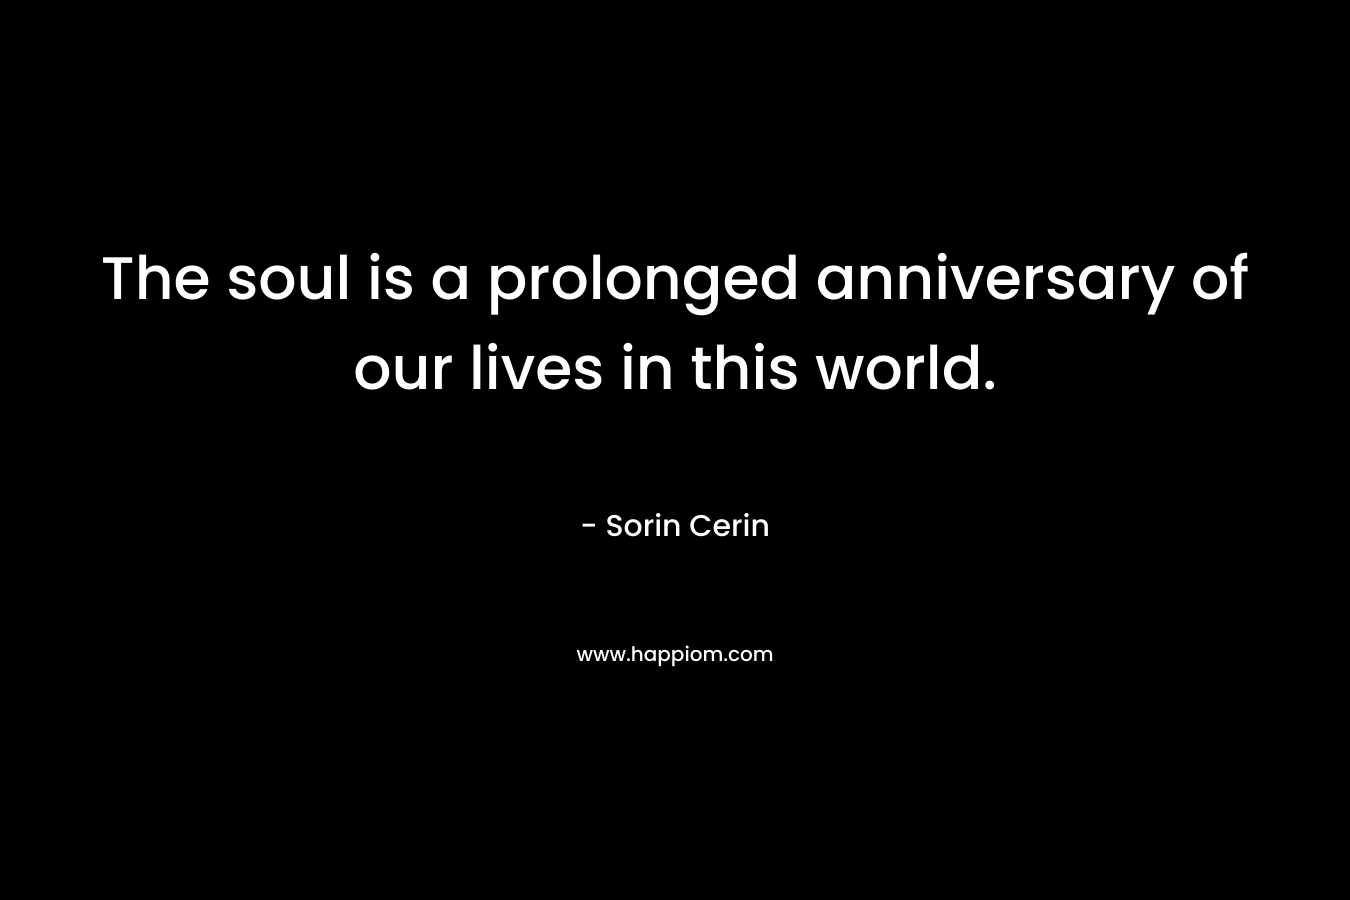 The soul is a prolonged anniversary of our lives in this world.